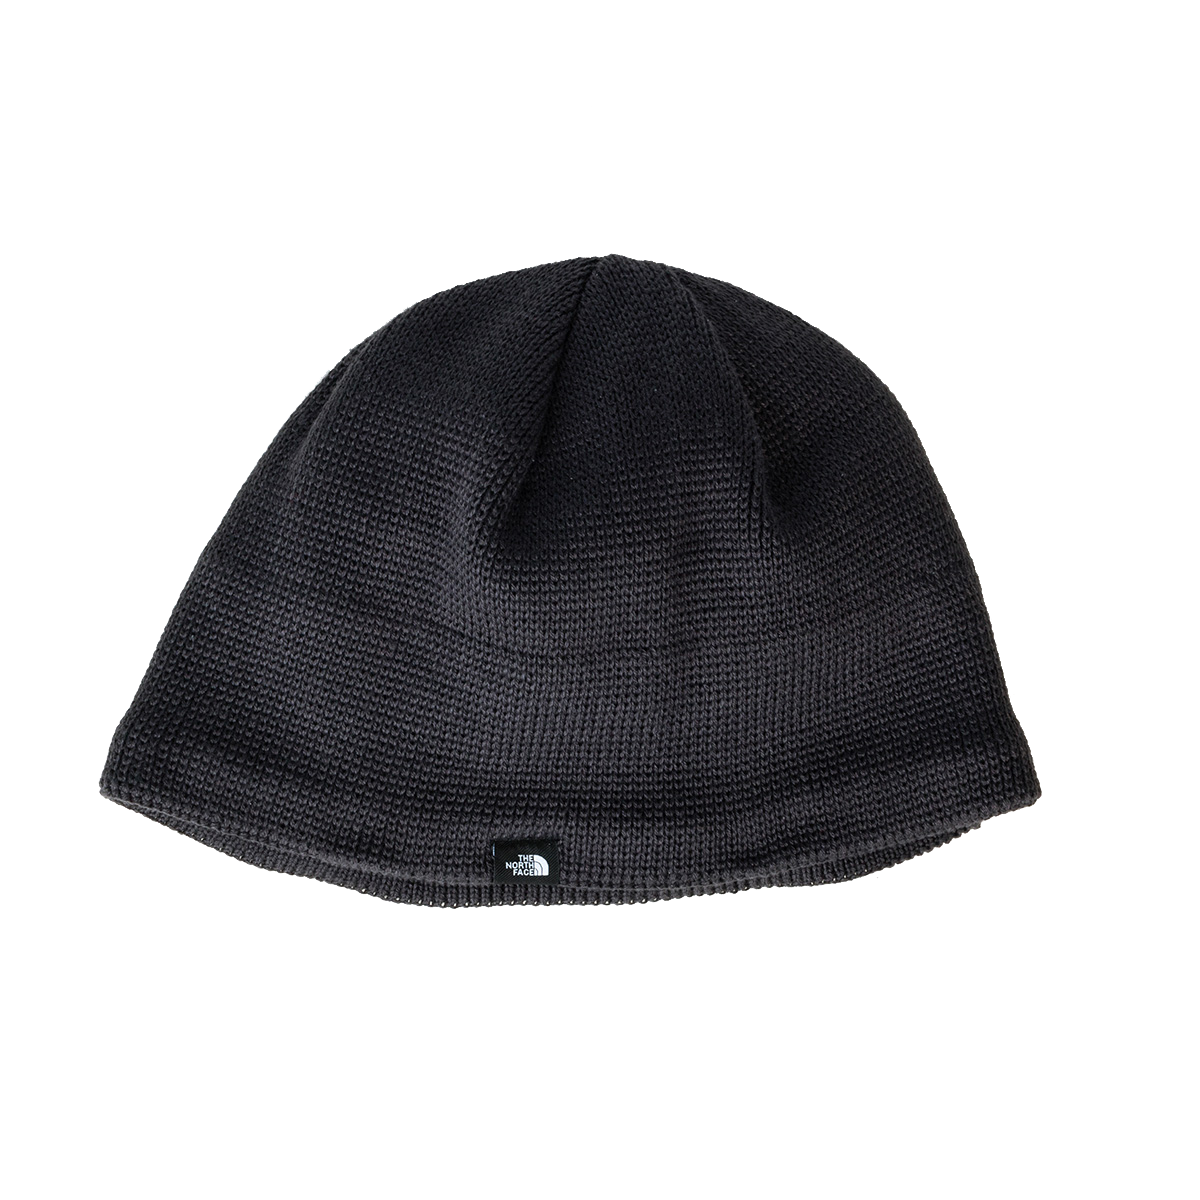 Buick North Face Mountain Beanie